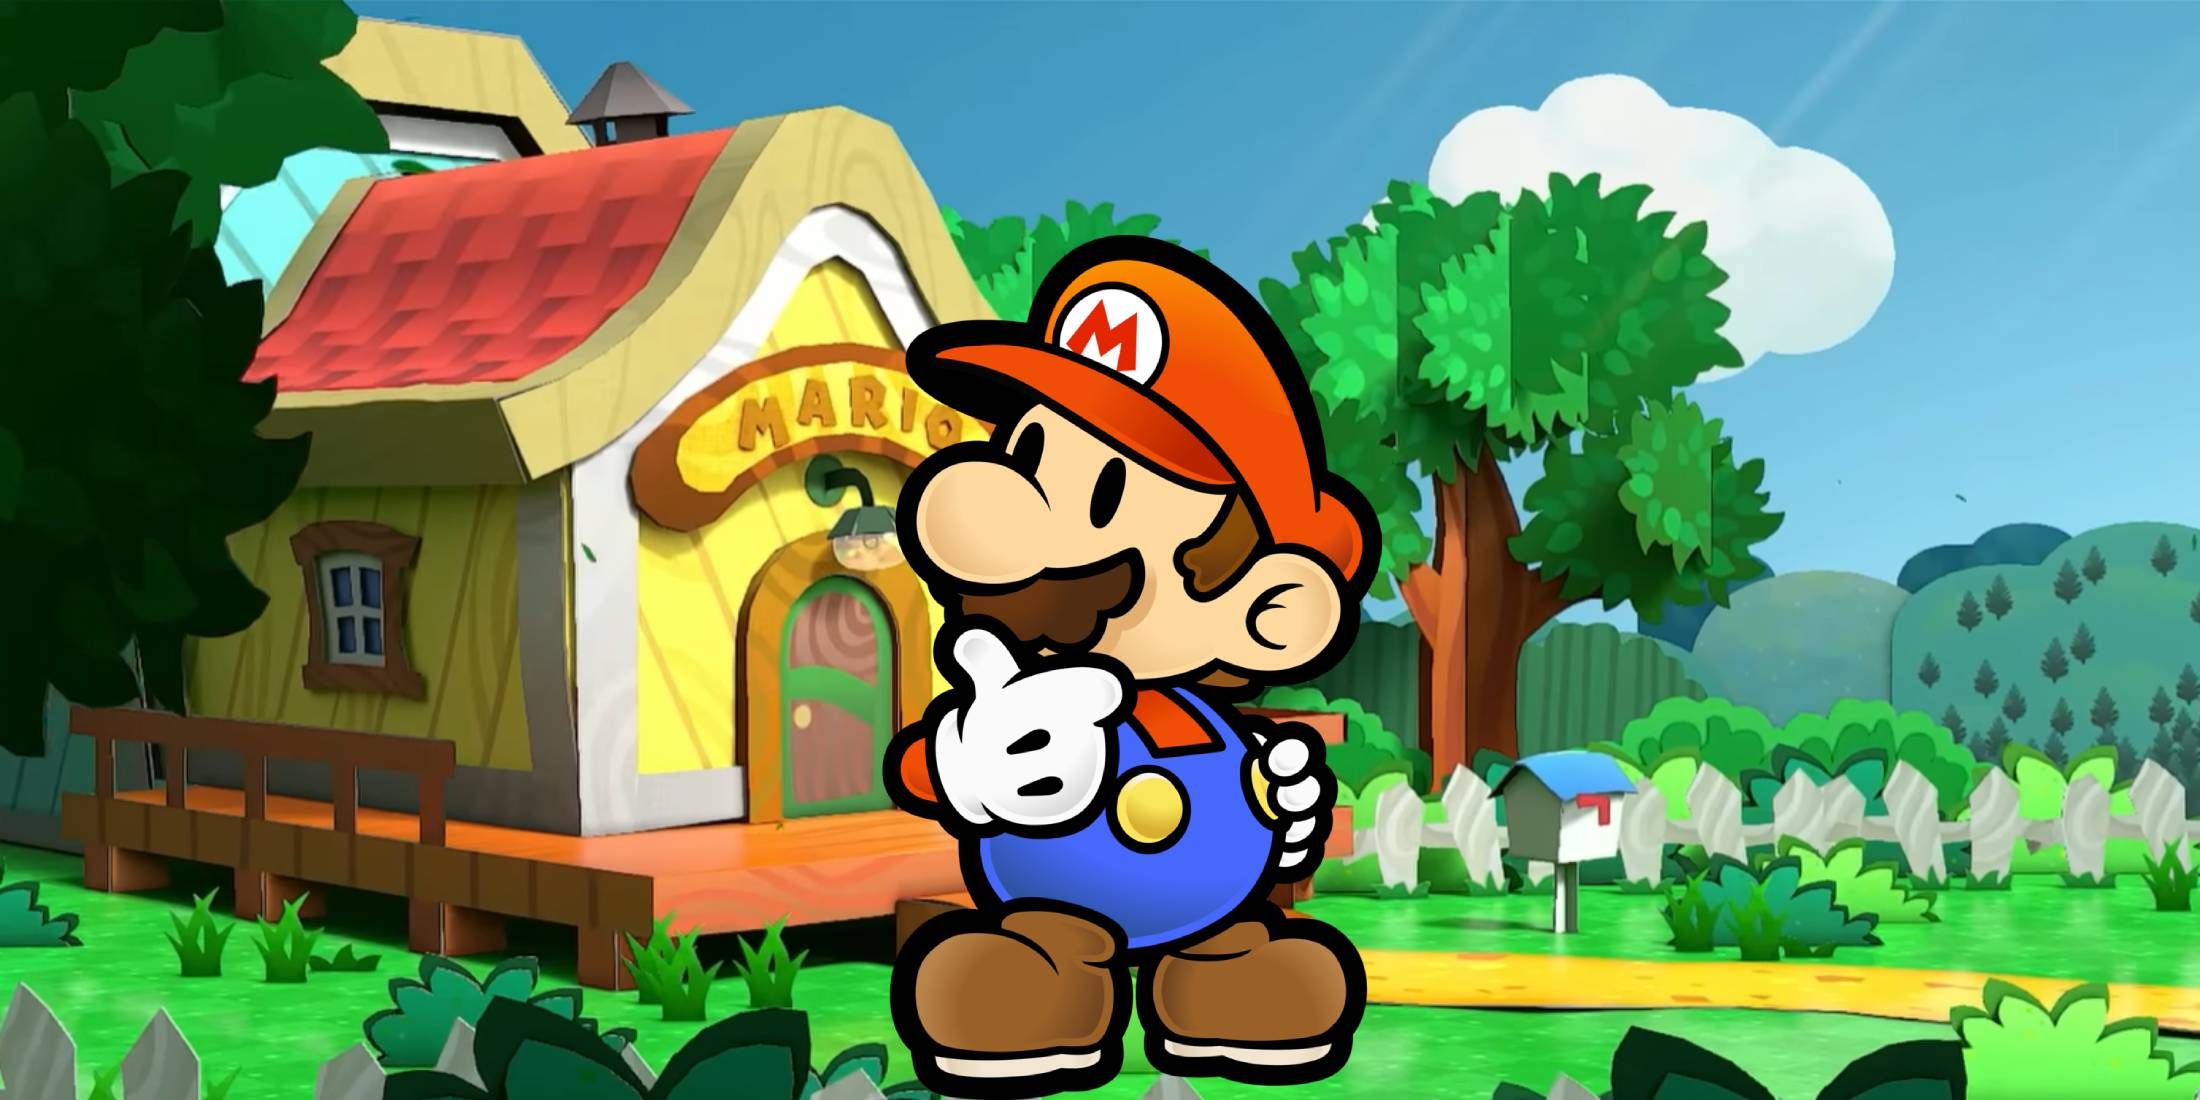 A thoughtful Mario in front of his house from Paper Mario: The Thousand-Year Door